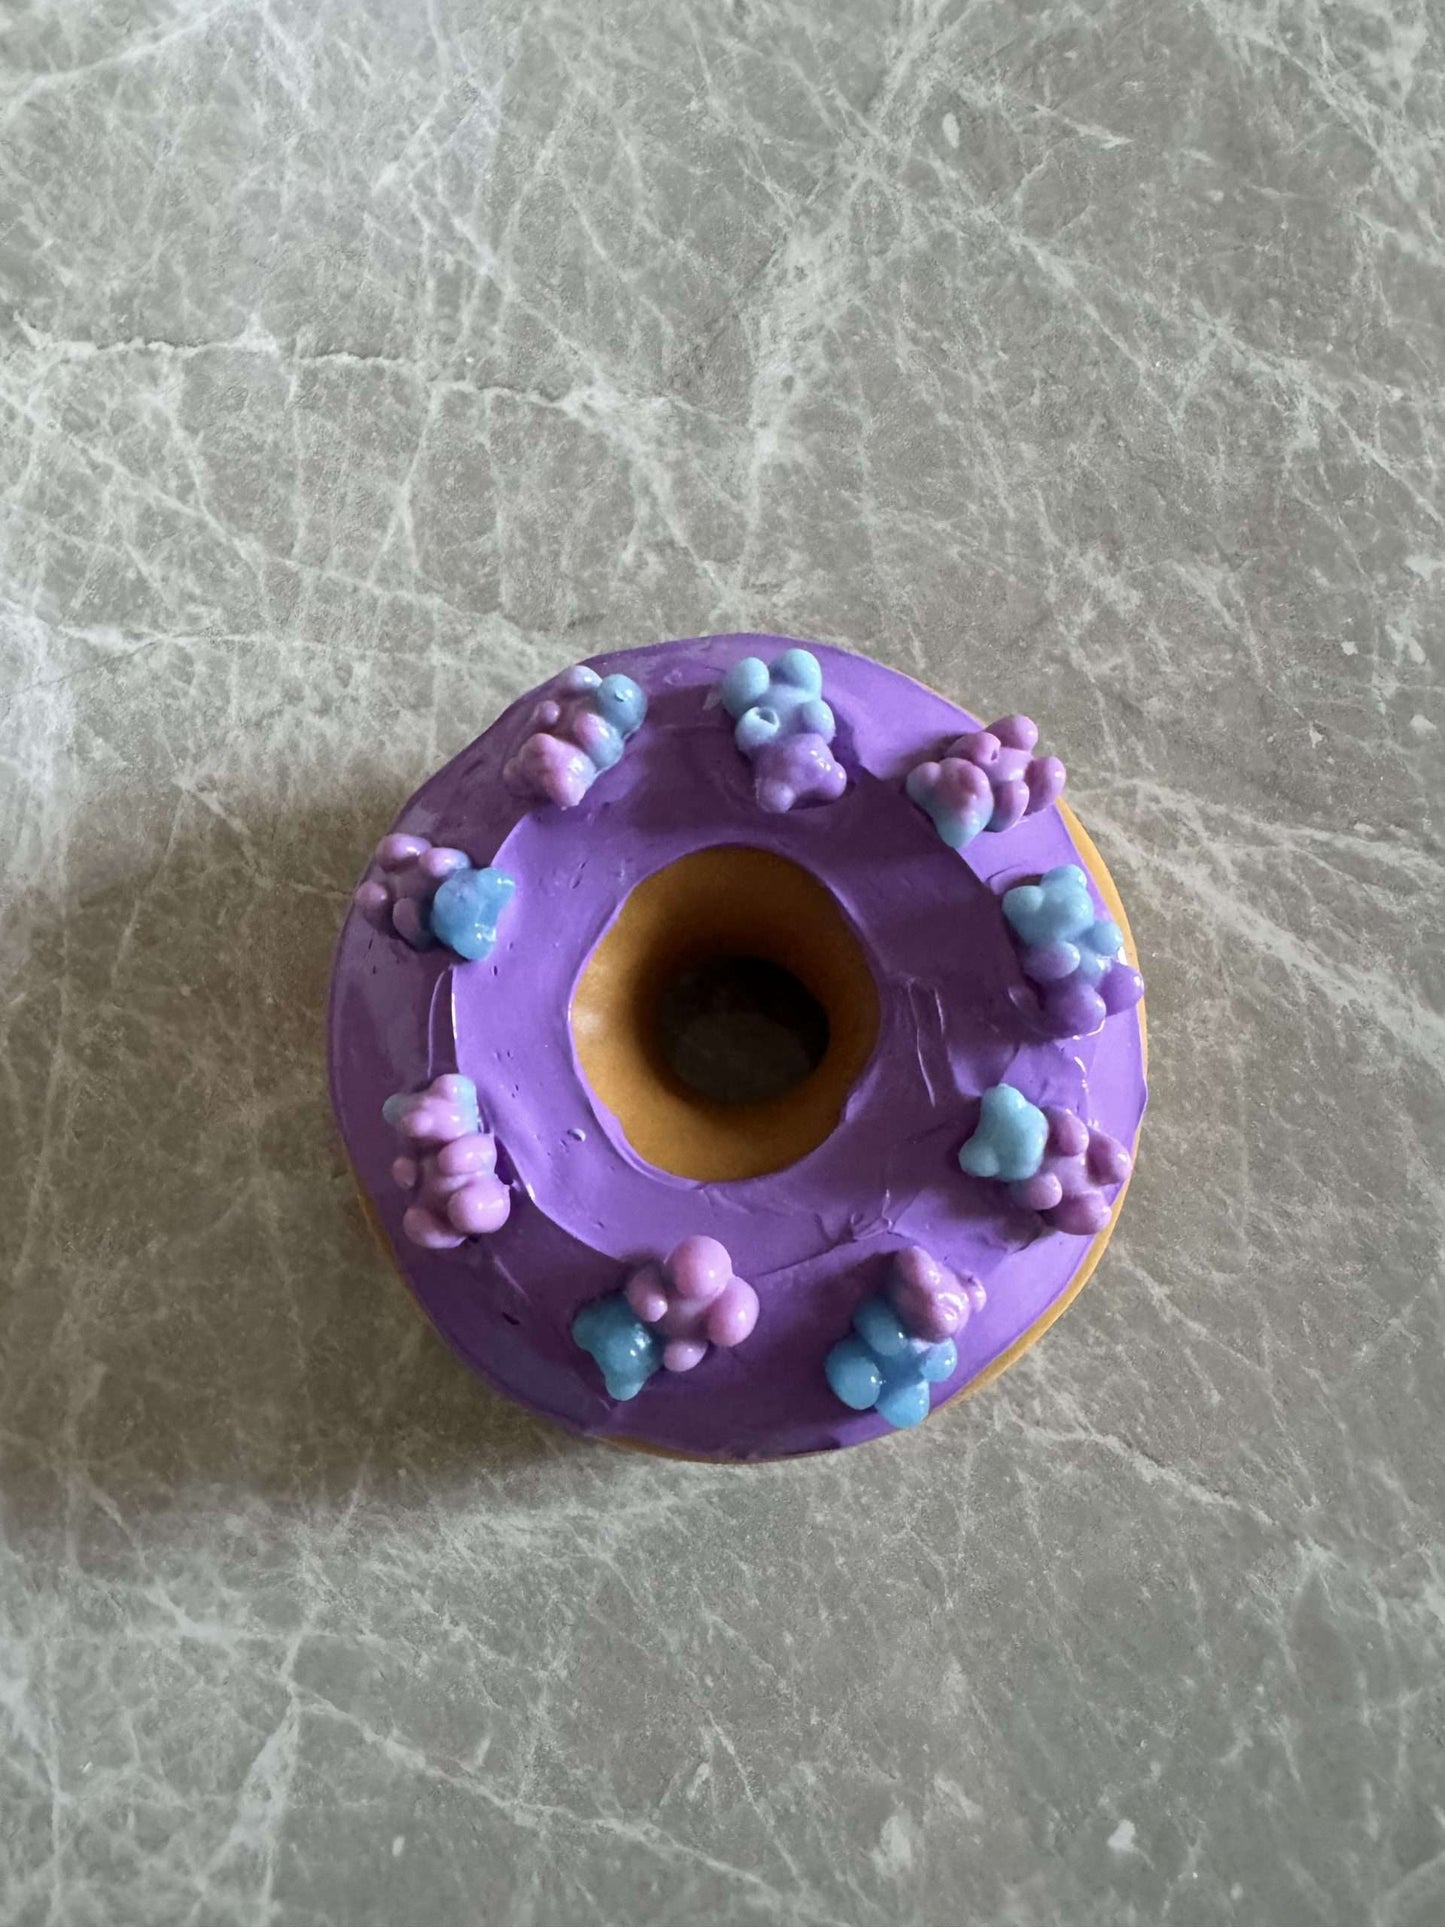 Donut with lilac icing and bear candies